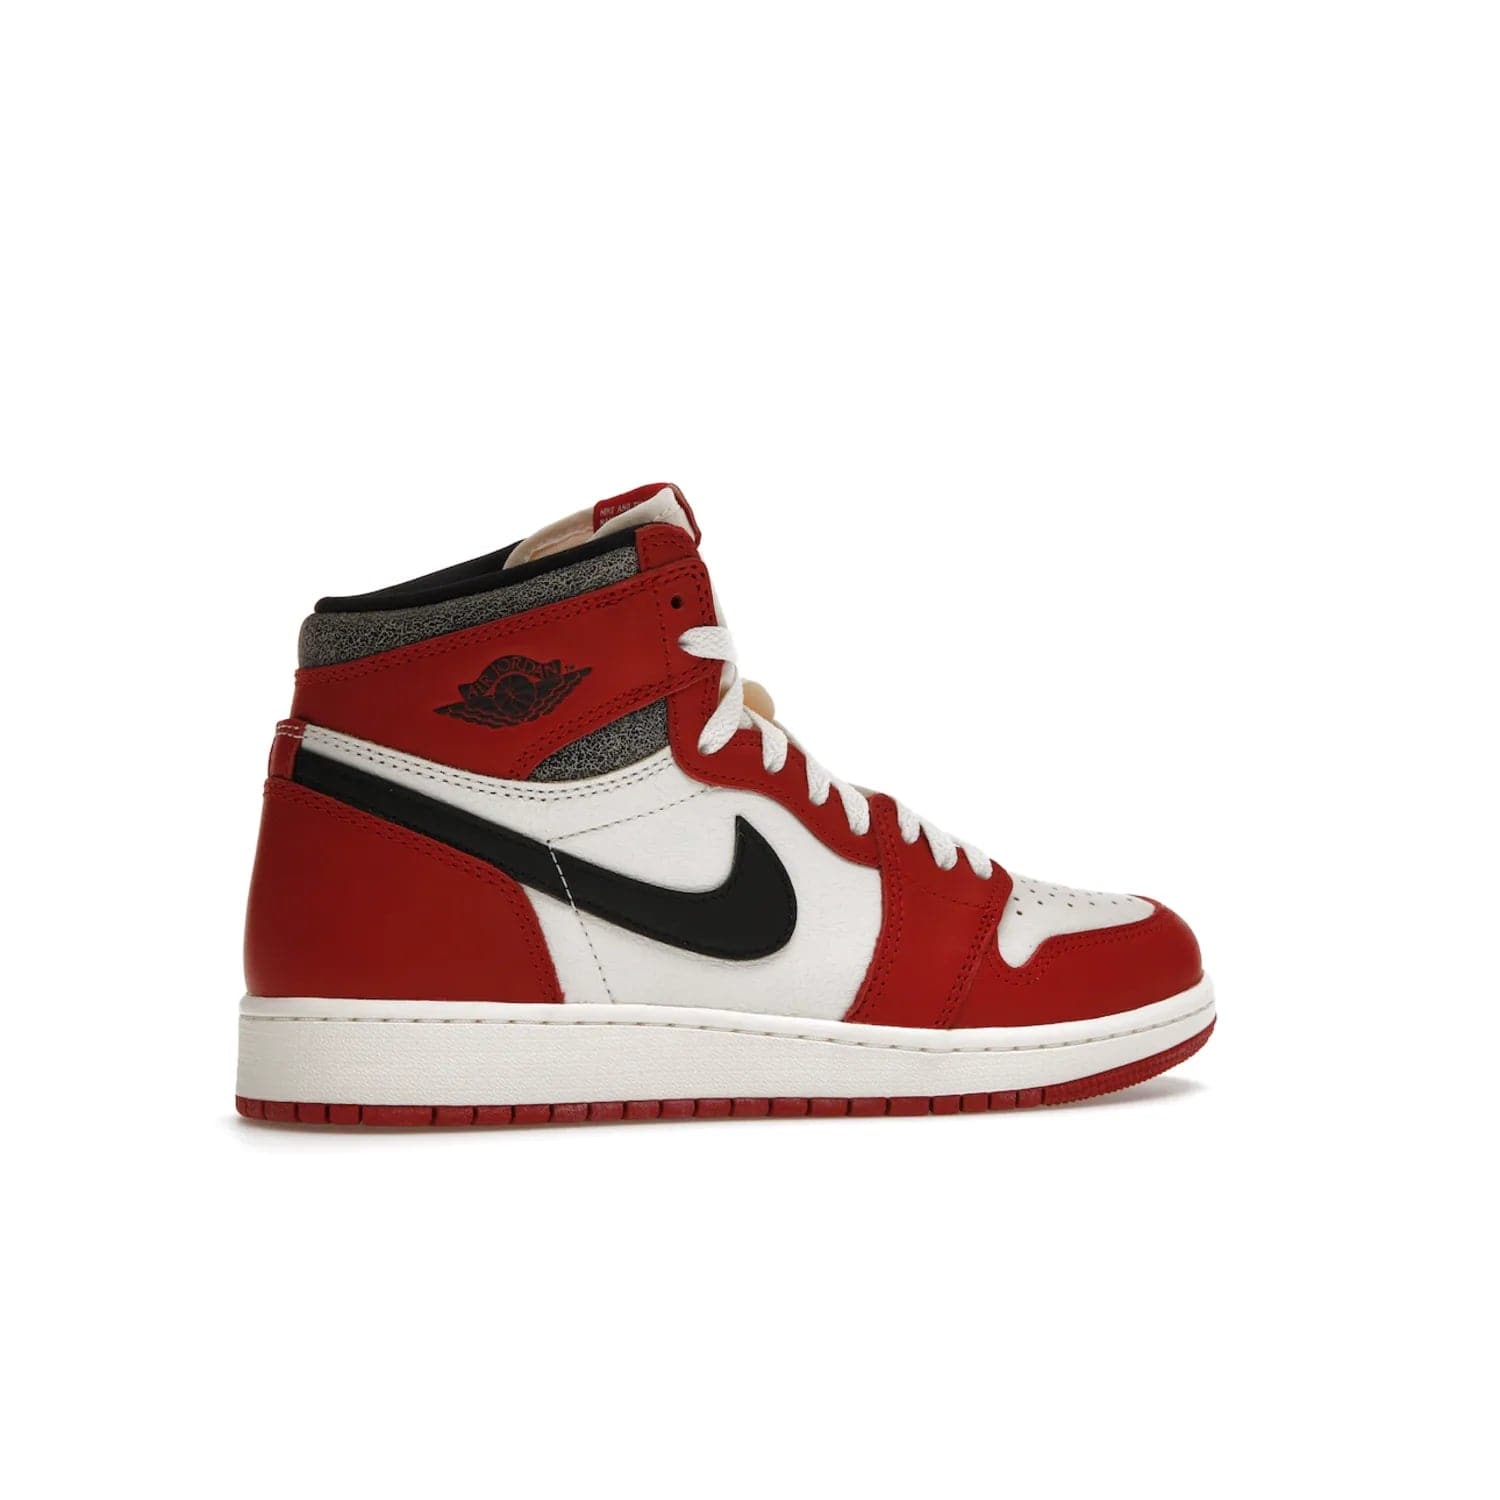 Jordan 1 Retro High OG Chicago Lost and Found (GS) - Image 35 - Only at www.BallersClubKickz.com - Grab the Air Jordan 1 Retro High OG Chicago Reimagined GS, presenting in classic 1985 silhouette. Varsity Red, Black, Muslin and Sail hues, featuring Nike Air branding, Wings on the collars and printed insoles. Don't miss out when it releases 19th Nov 2022.